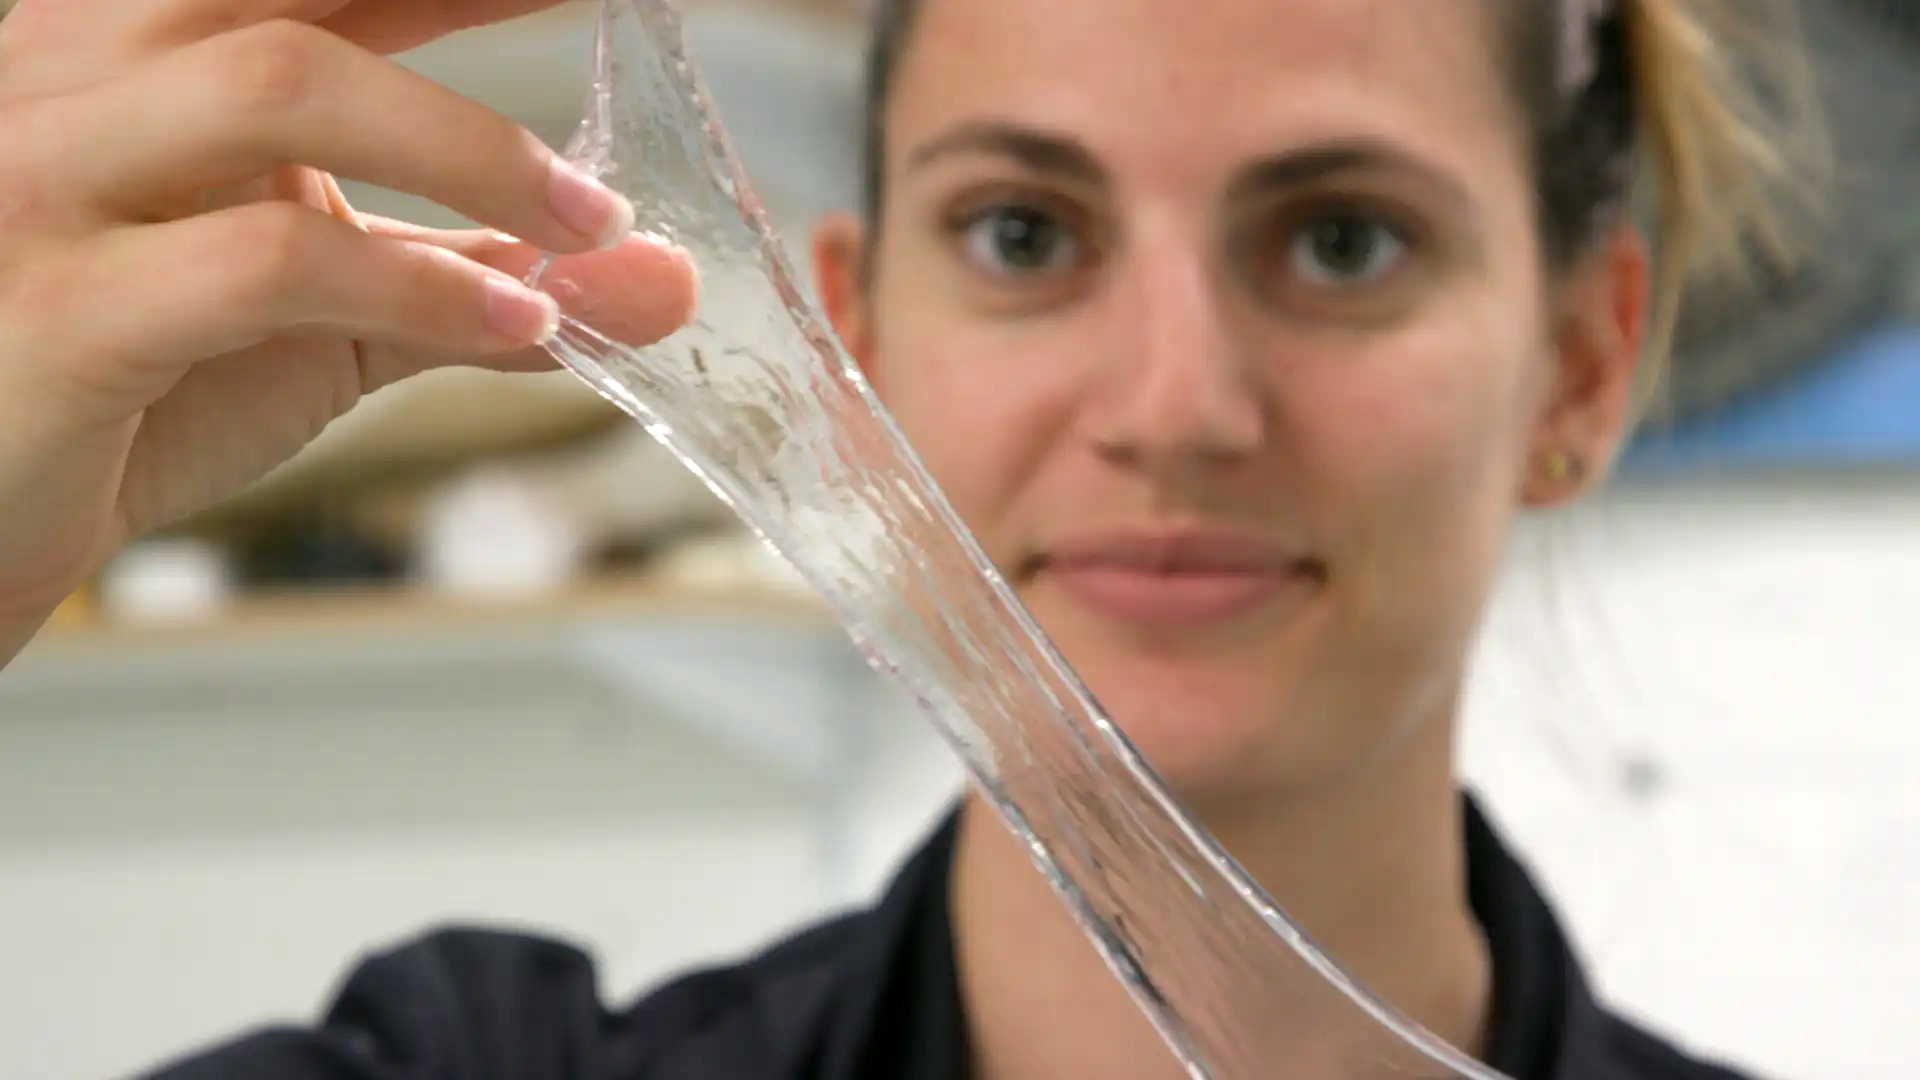 Gooey membrane that hardens into plastic-like material. (Claire Price/Business Insider Today)